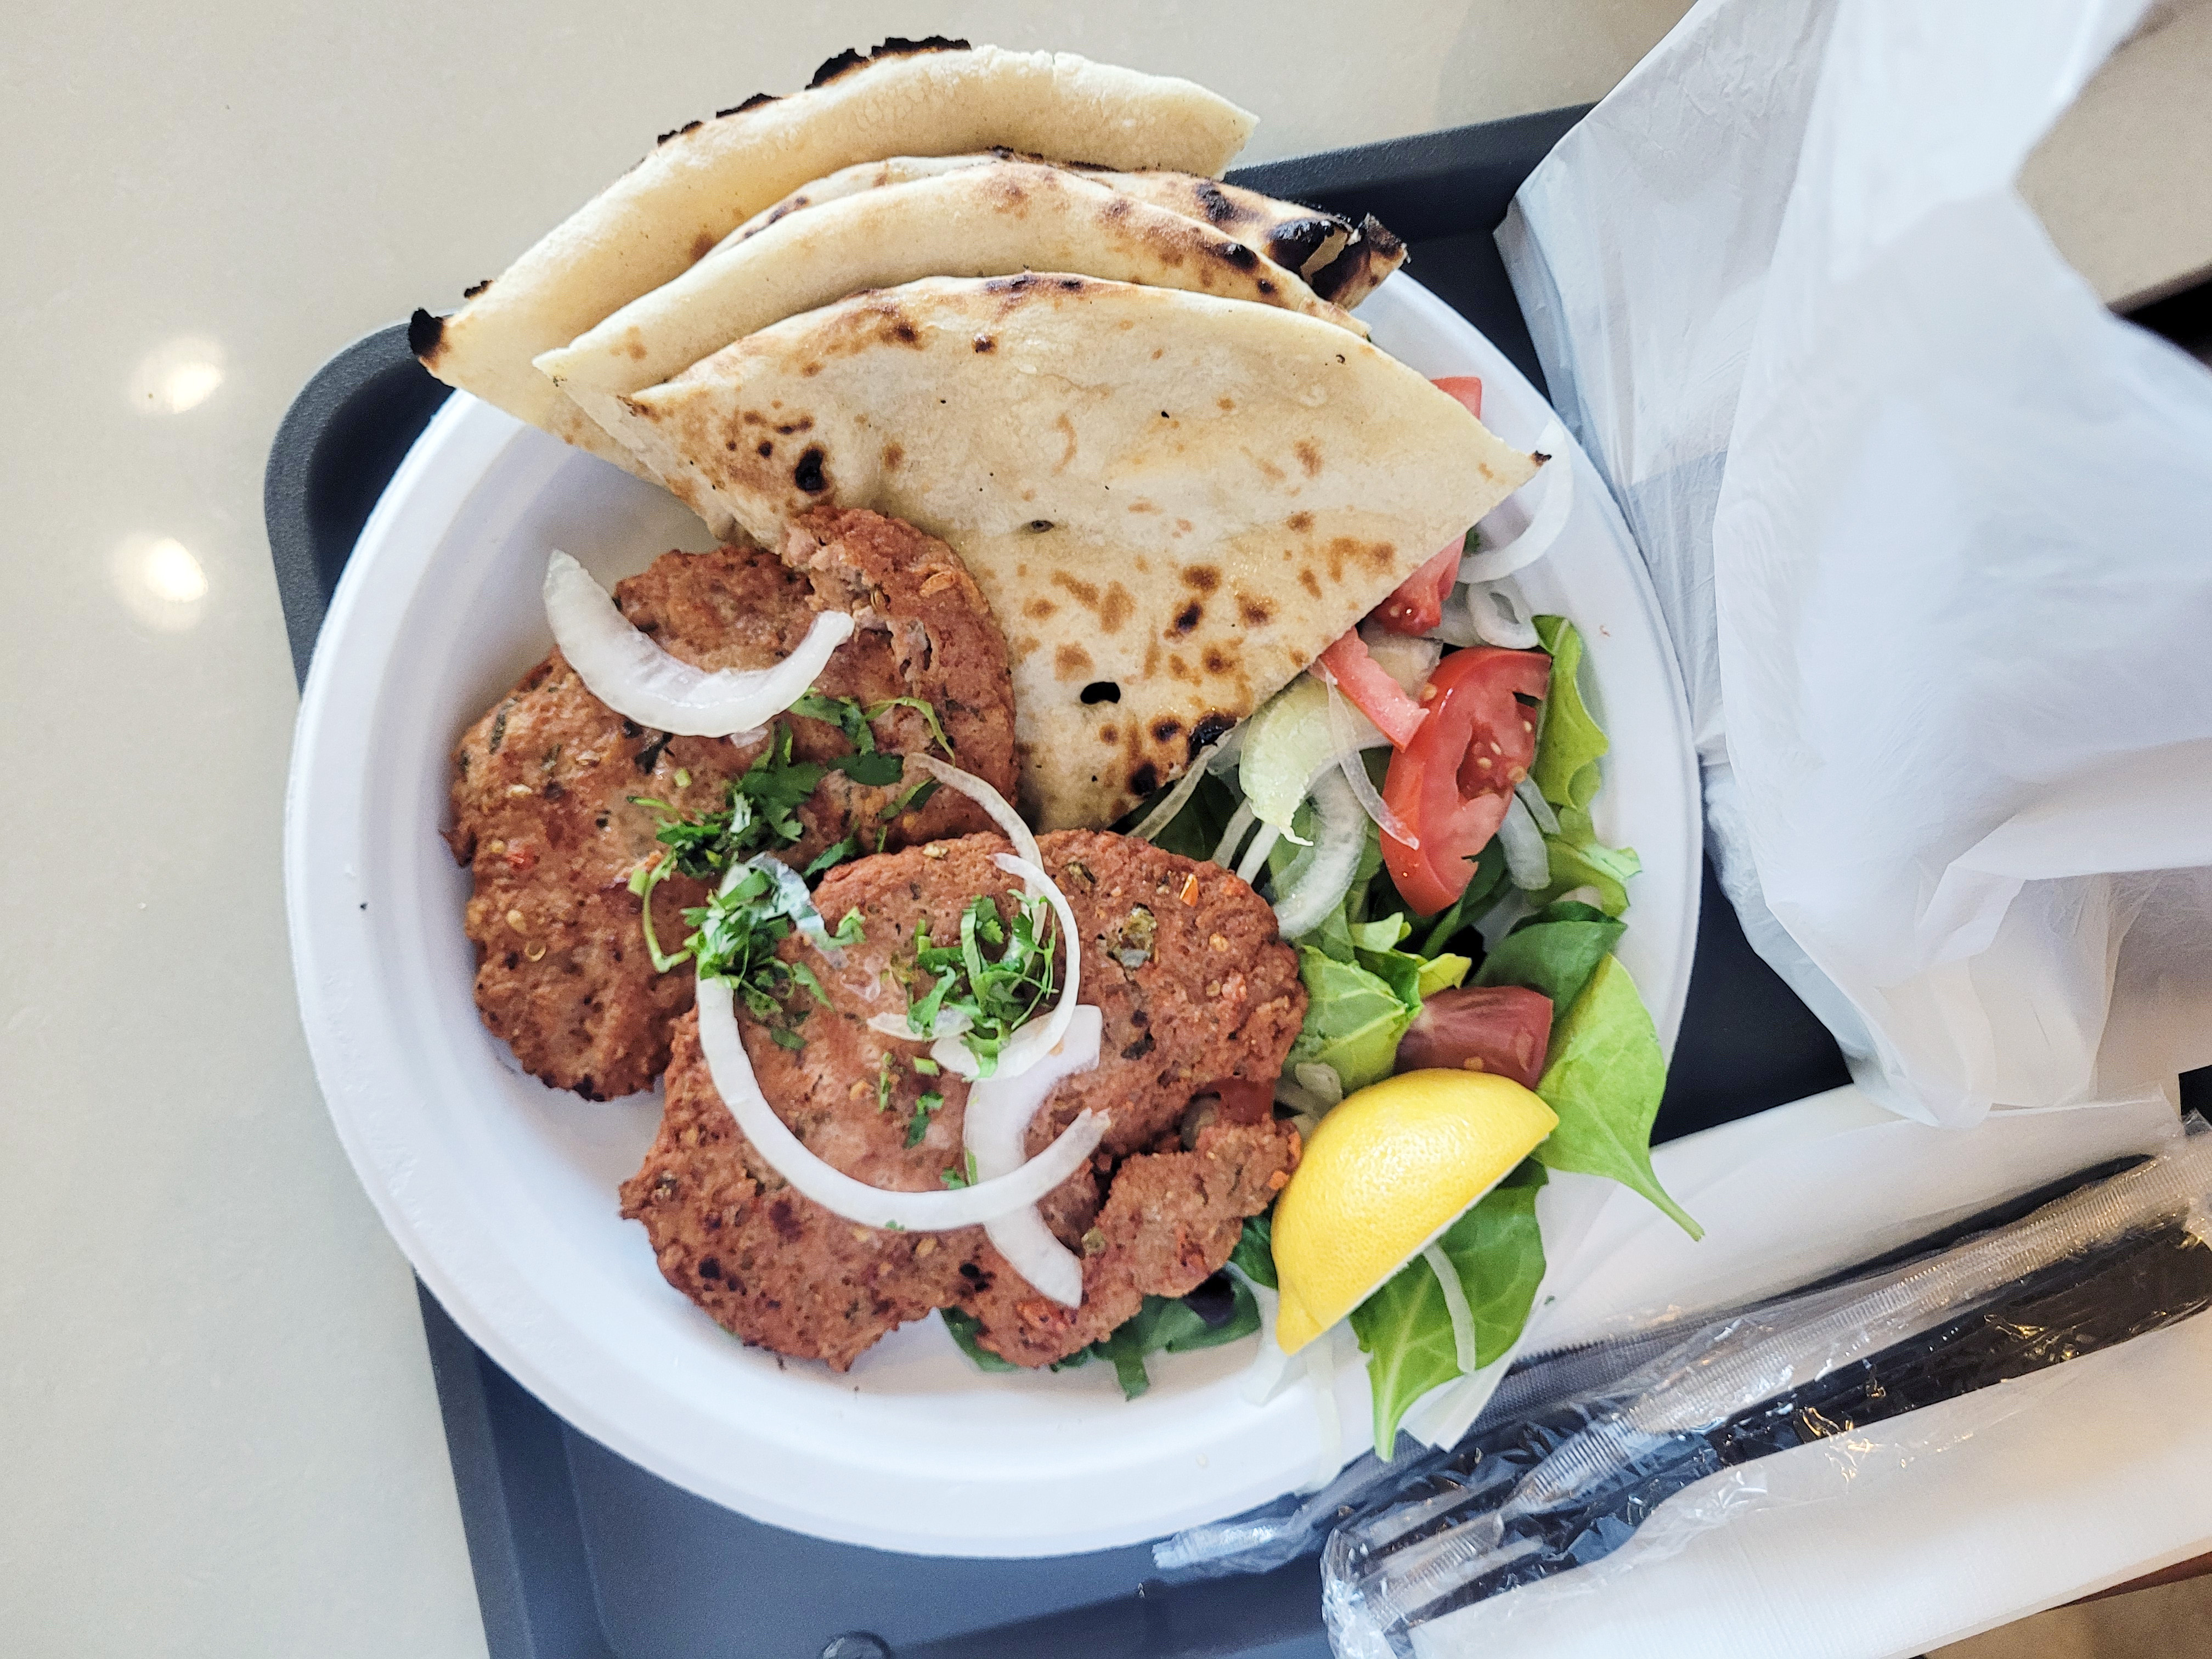 A pair of minced kebabs made from ground beef with various spices in the shape of a patty sit on a plate with naan.